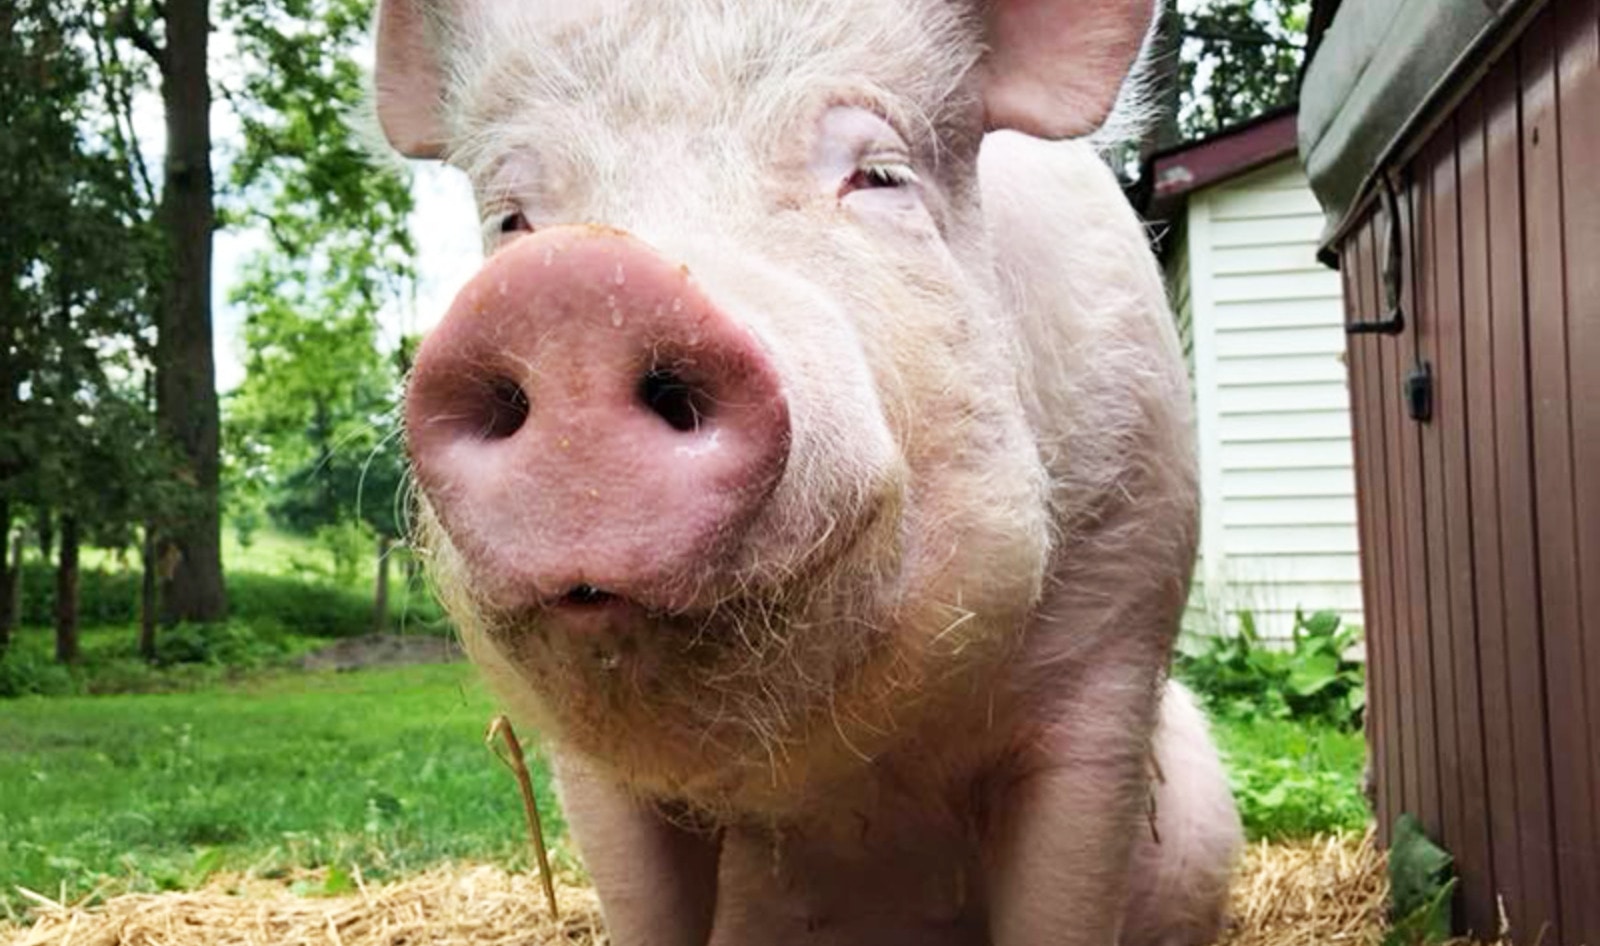 Esther The Wonder Pig Denied Chemotherapy Because She Is a “Food Animal”